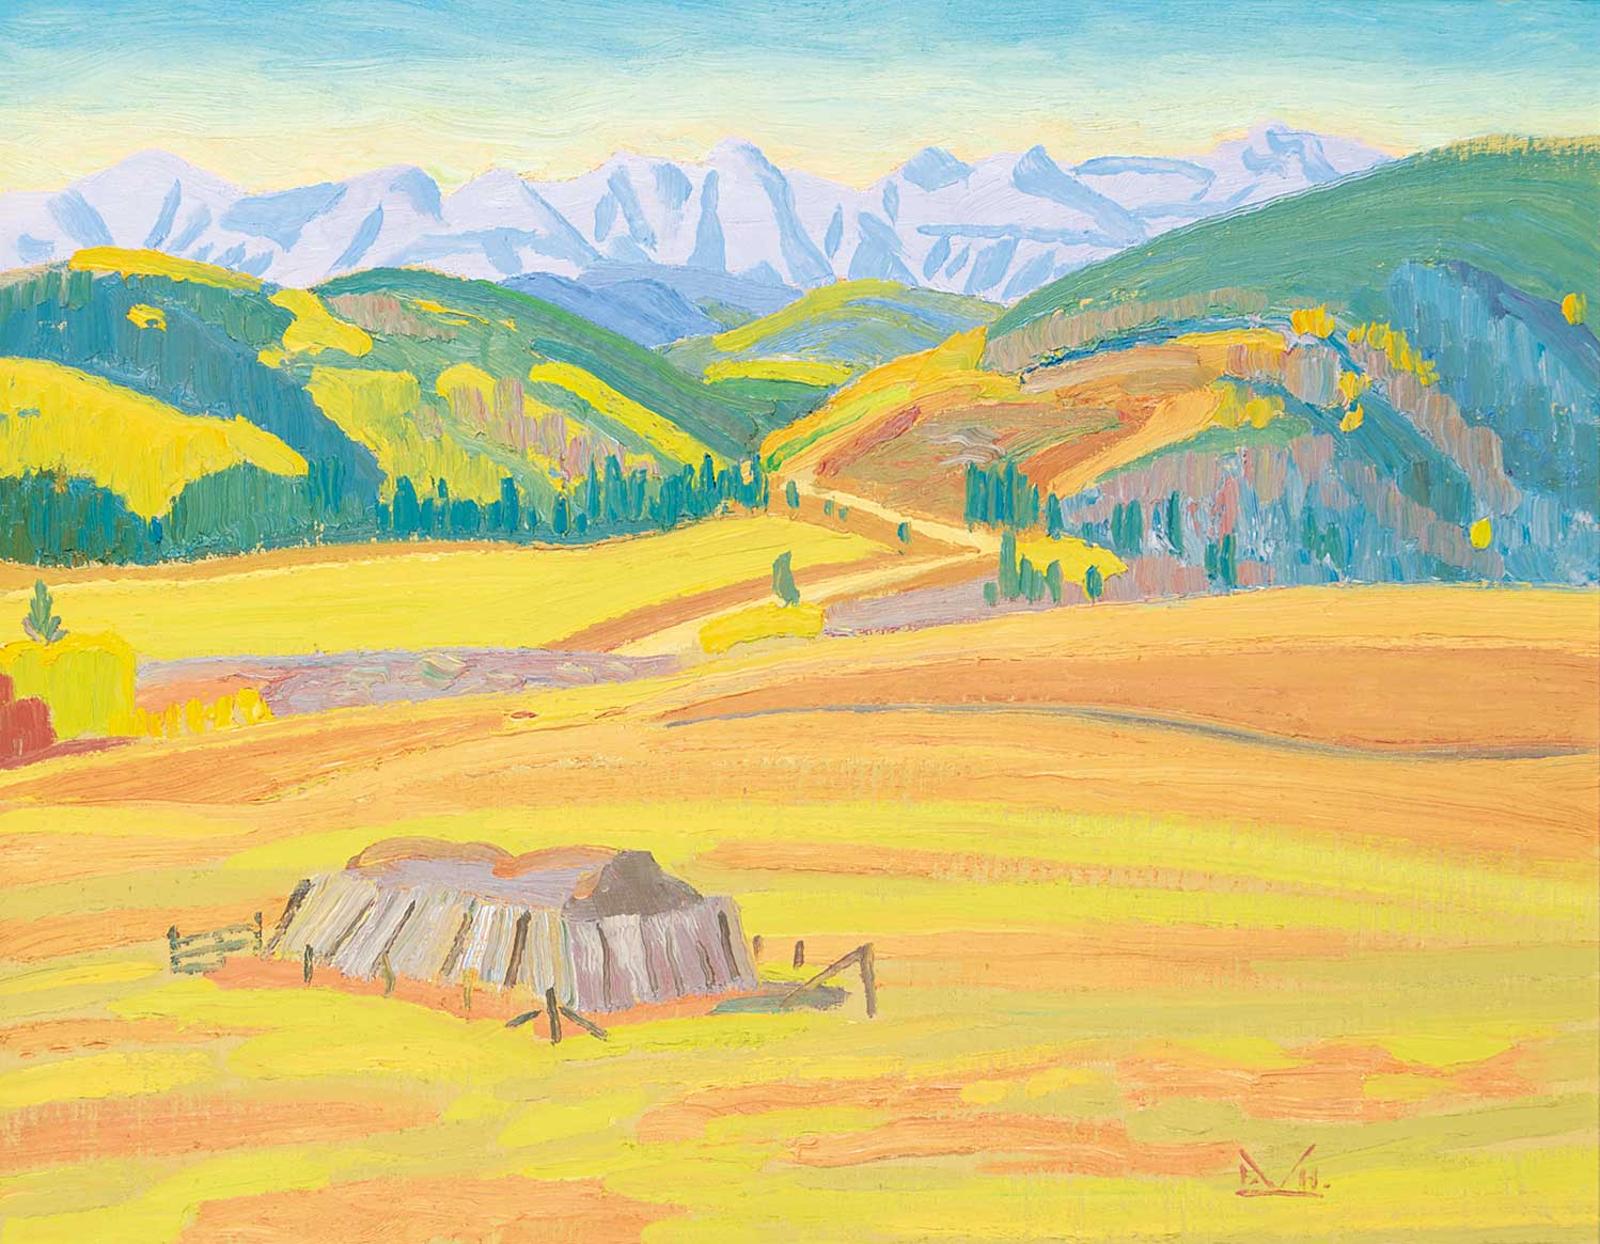 Illingworth Holey (Buck) Kerr (1905-1989) - West of Turner Valley Town, Stack Protected from Elk